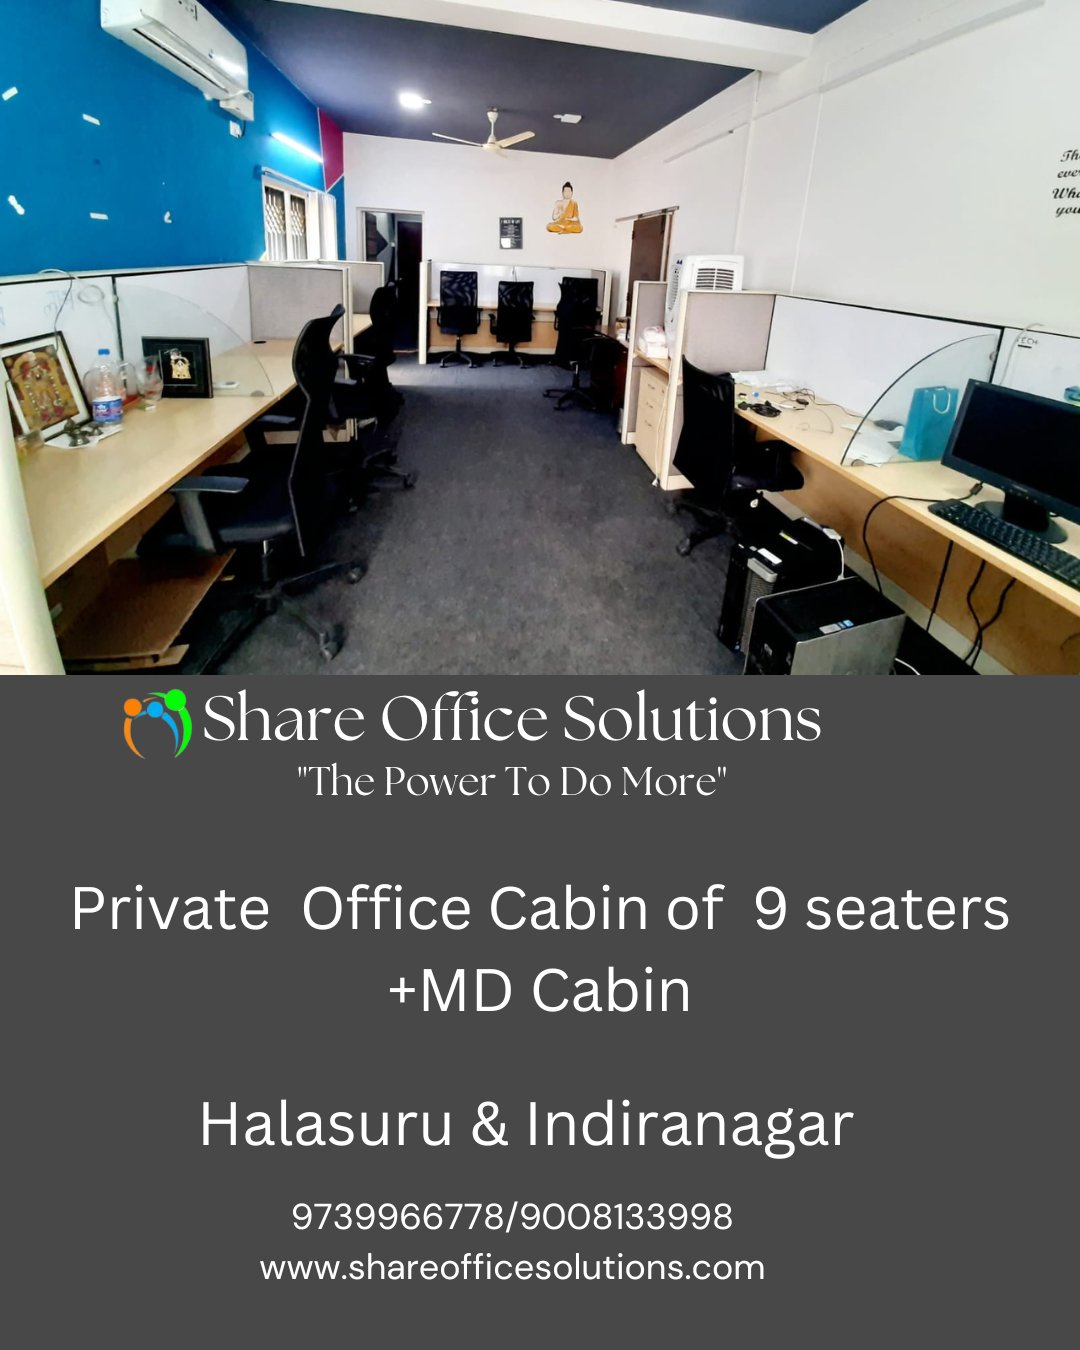 Share Office Solutions (@SOS_Coworking) / Twitter